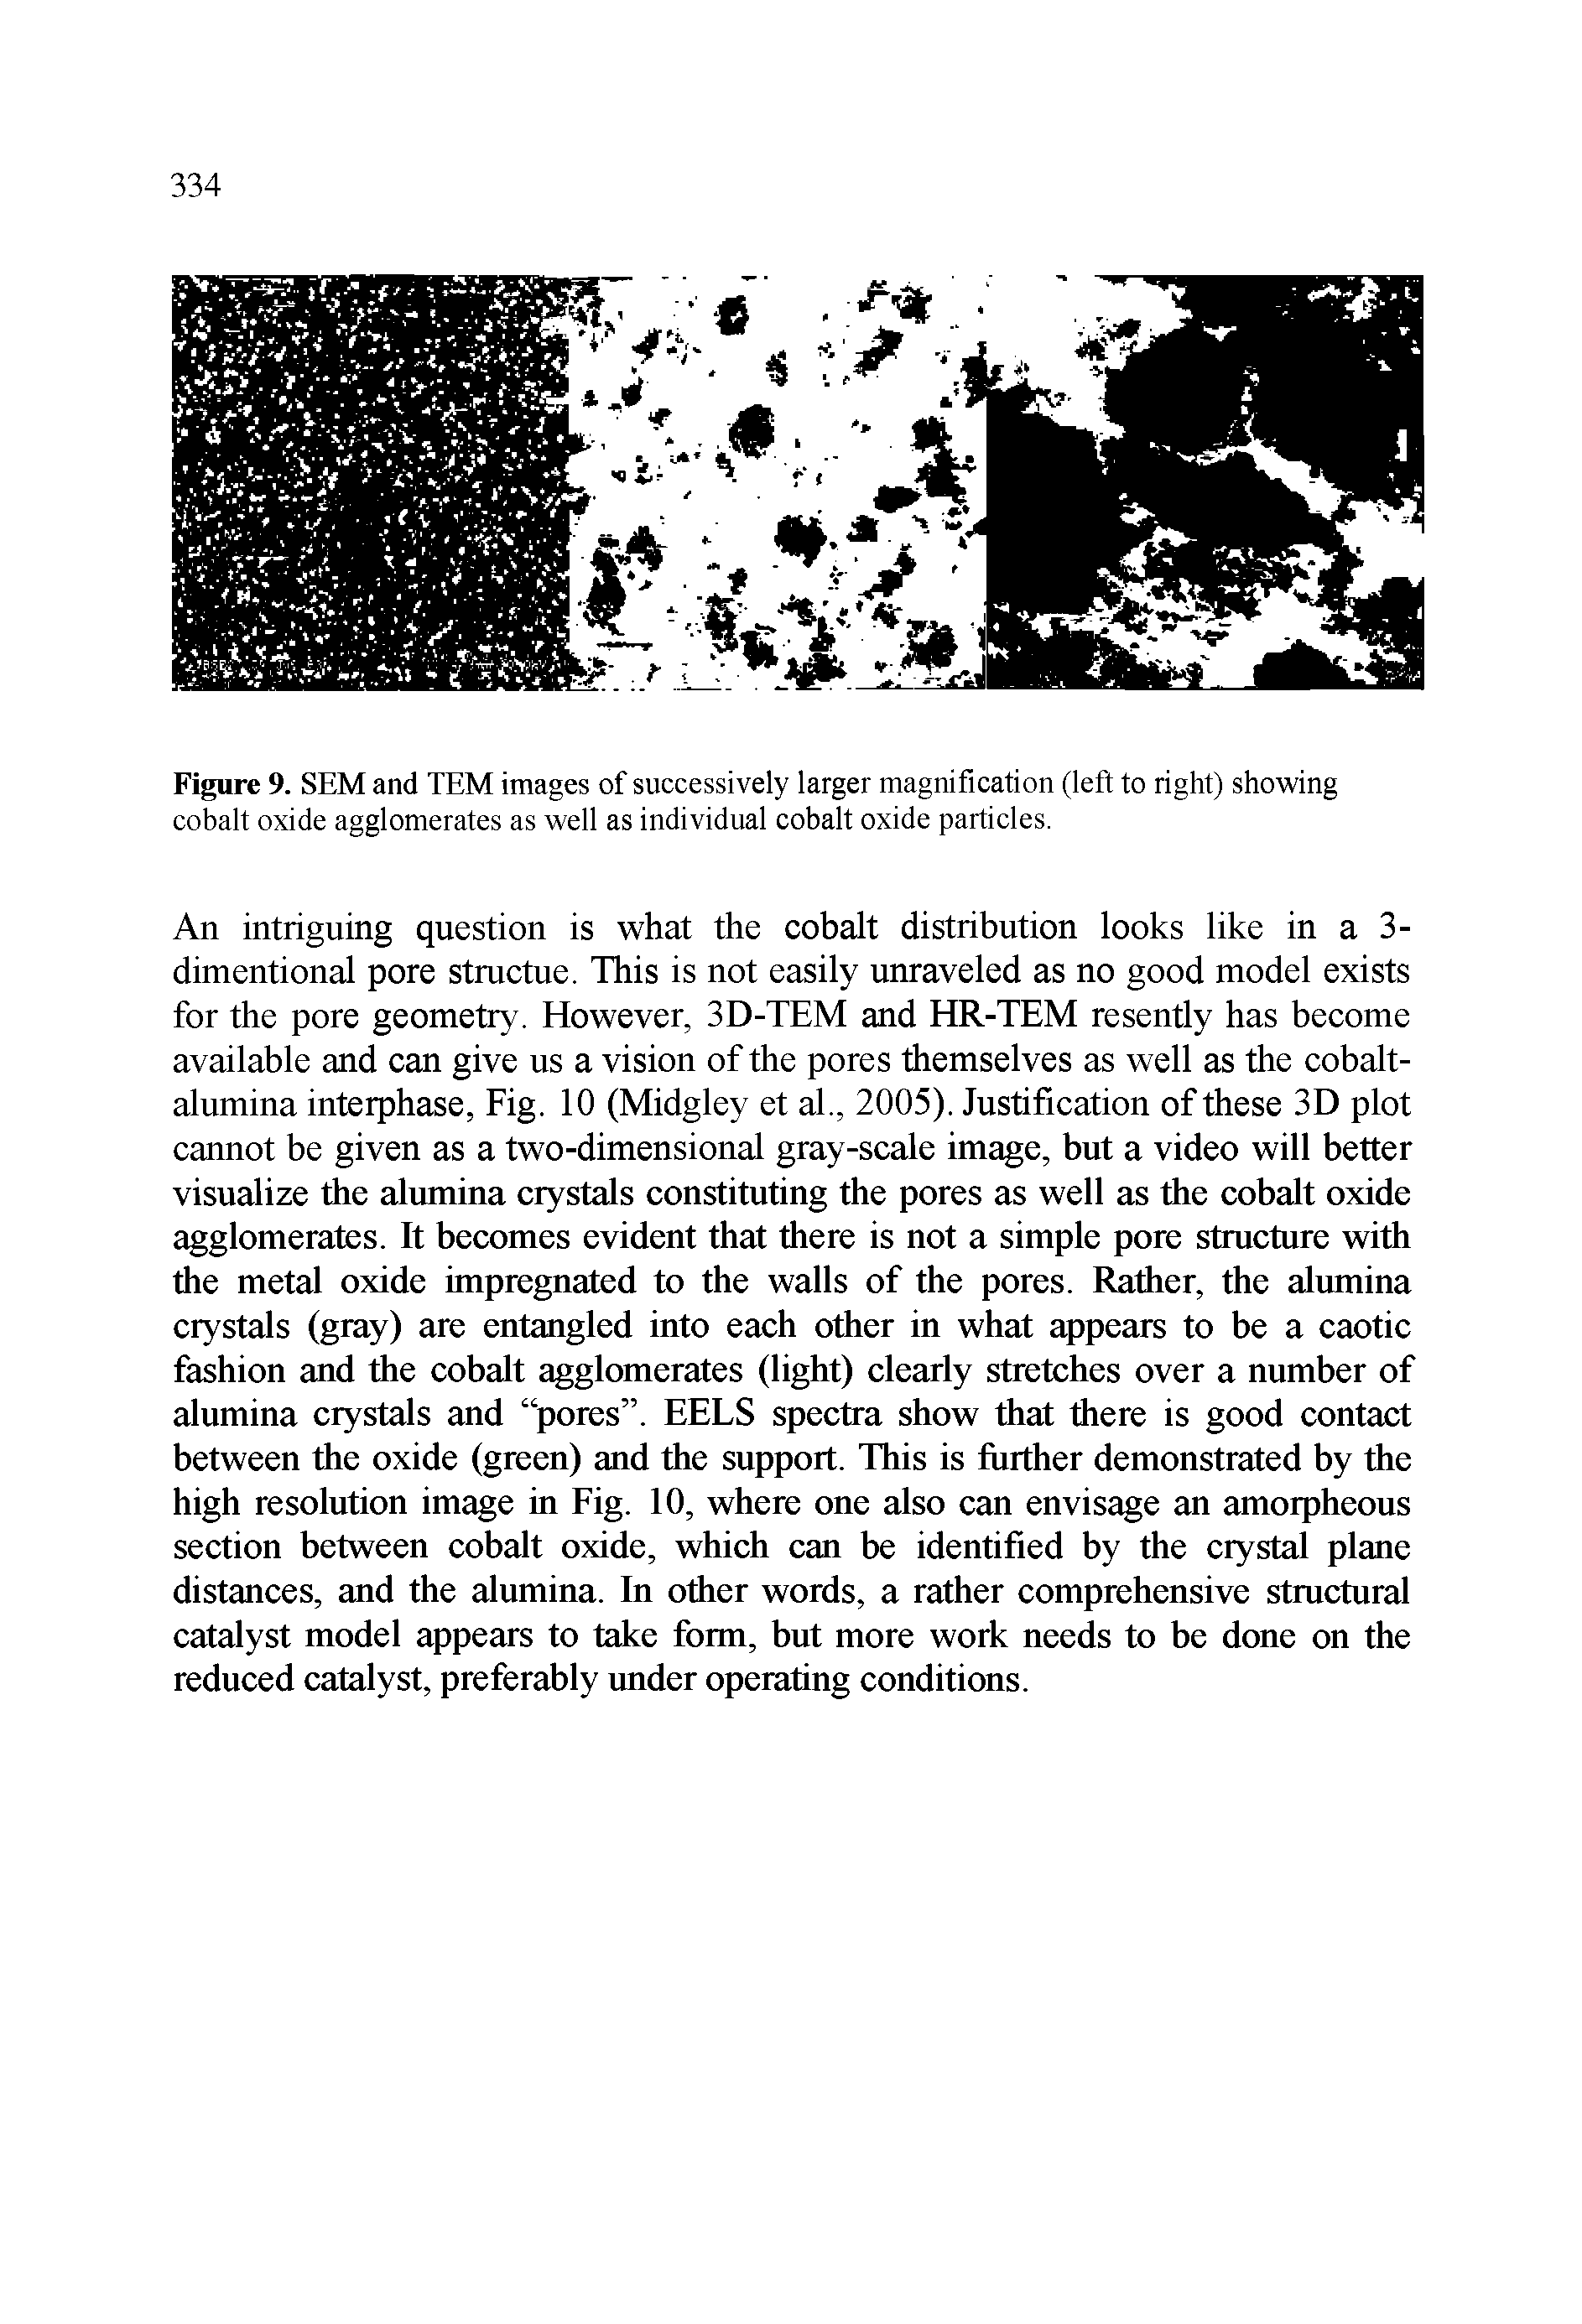 Figure 9. SEM and TEM images of successively larger magnification (left to right) showing cobalt oxide agglomerates as well as individual cobalt oxide particles.